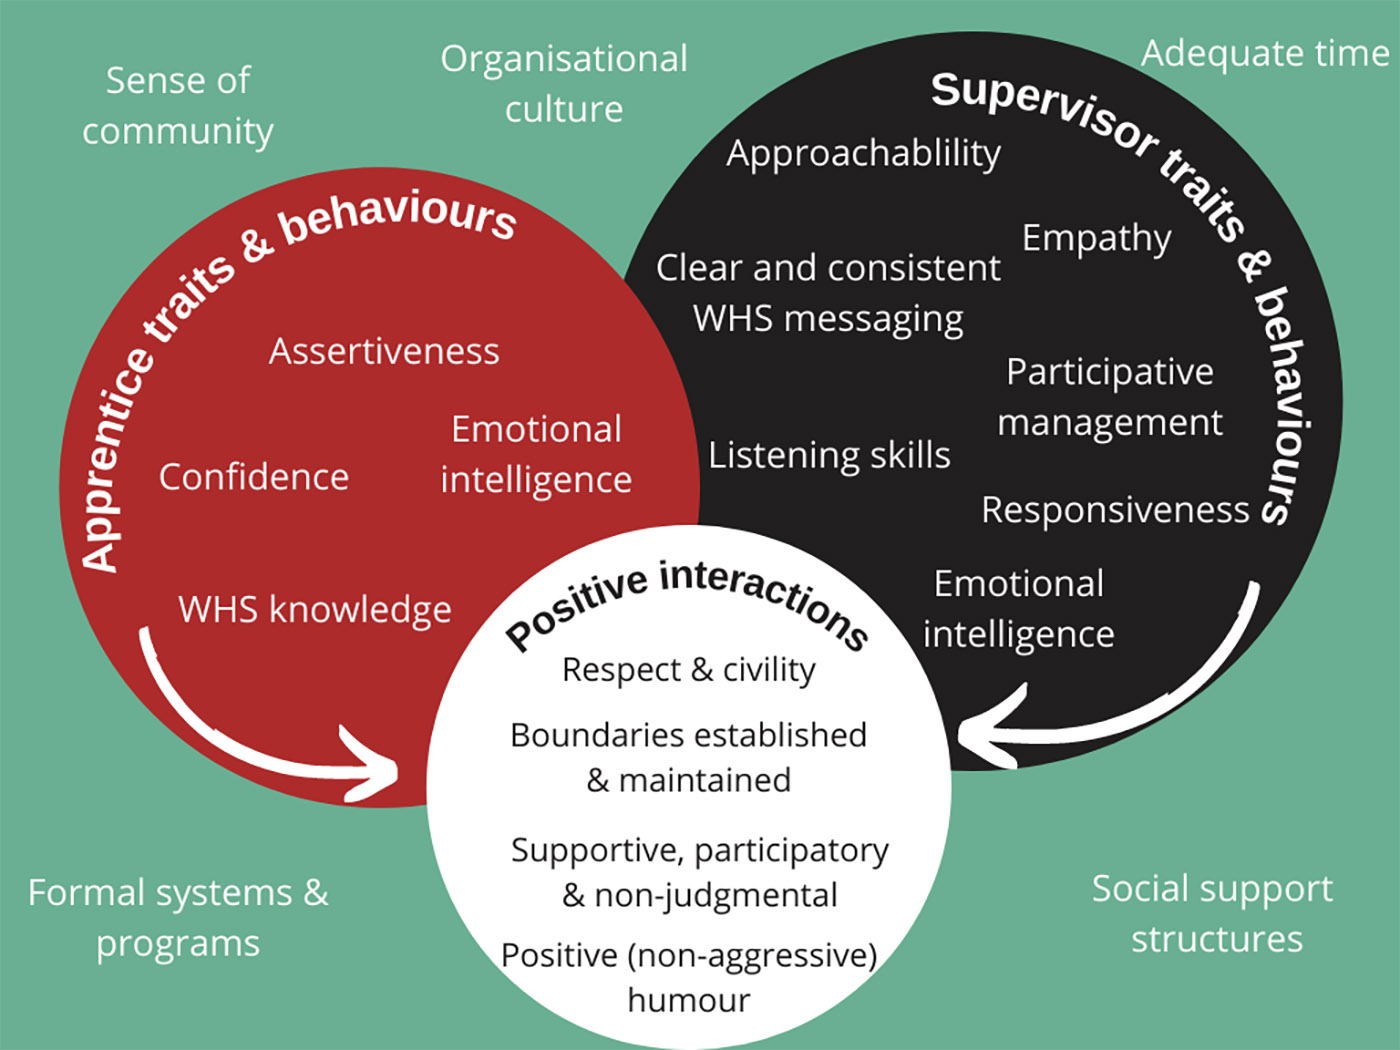 circles of Apprentice traits & behaviours (assertiveness, emotional intelligence, confidence, WHS knowledge) circle of Supervisor traits & behaviours (approachability, empathy, clear and consistent WHS messaging, participative management, listening skills, responsiveness, emotional intelligence) Both circles point to a circle of Positive interactions (respect & civility, boundaries established and maintained, supportive, participatory and non-judemental, positive (non-aggressive) humour. Around the outside sense of community, organisational culture, adequate time, formal systems and programs, social support structures.